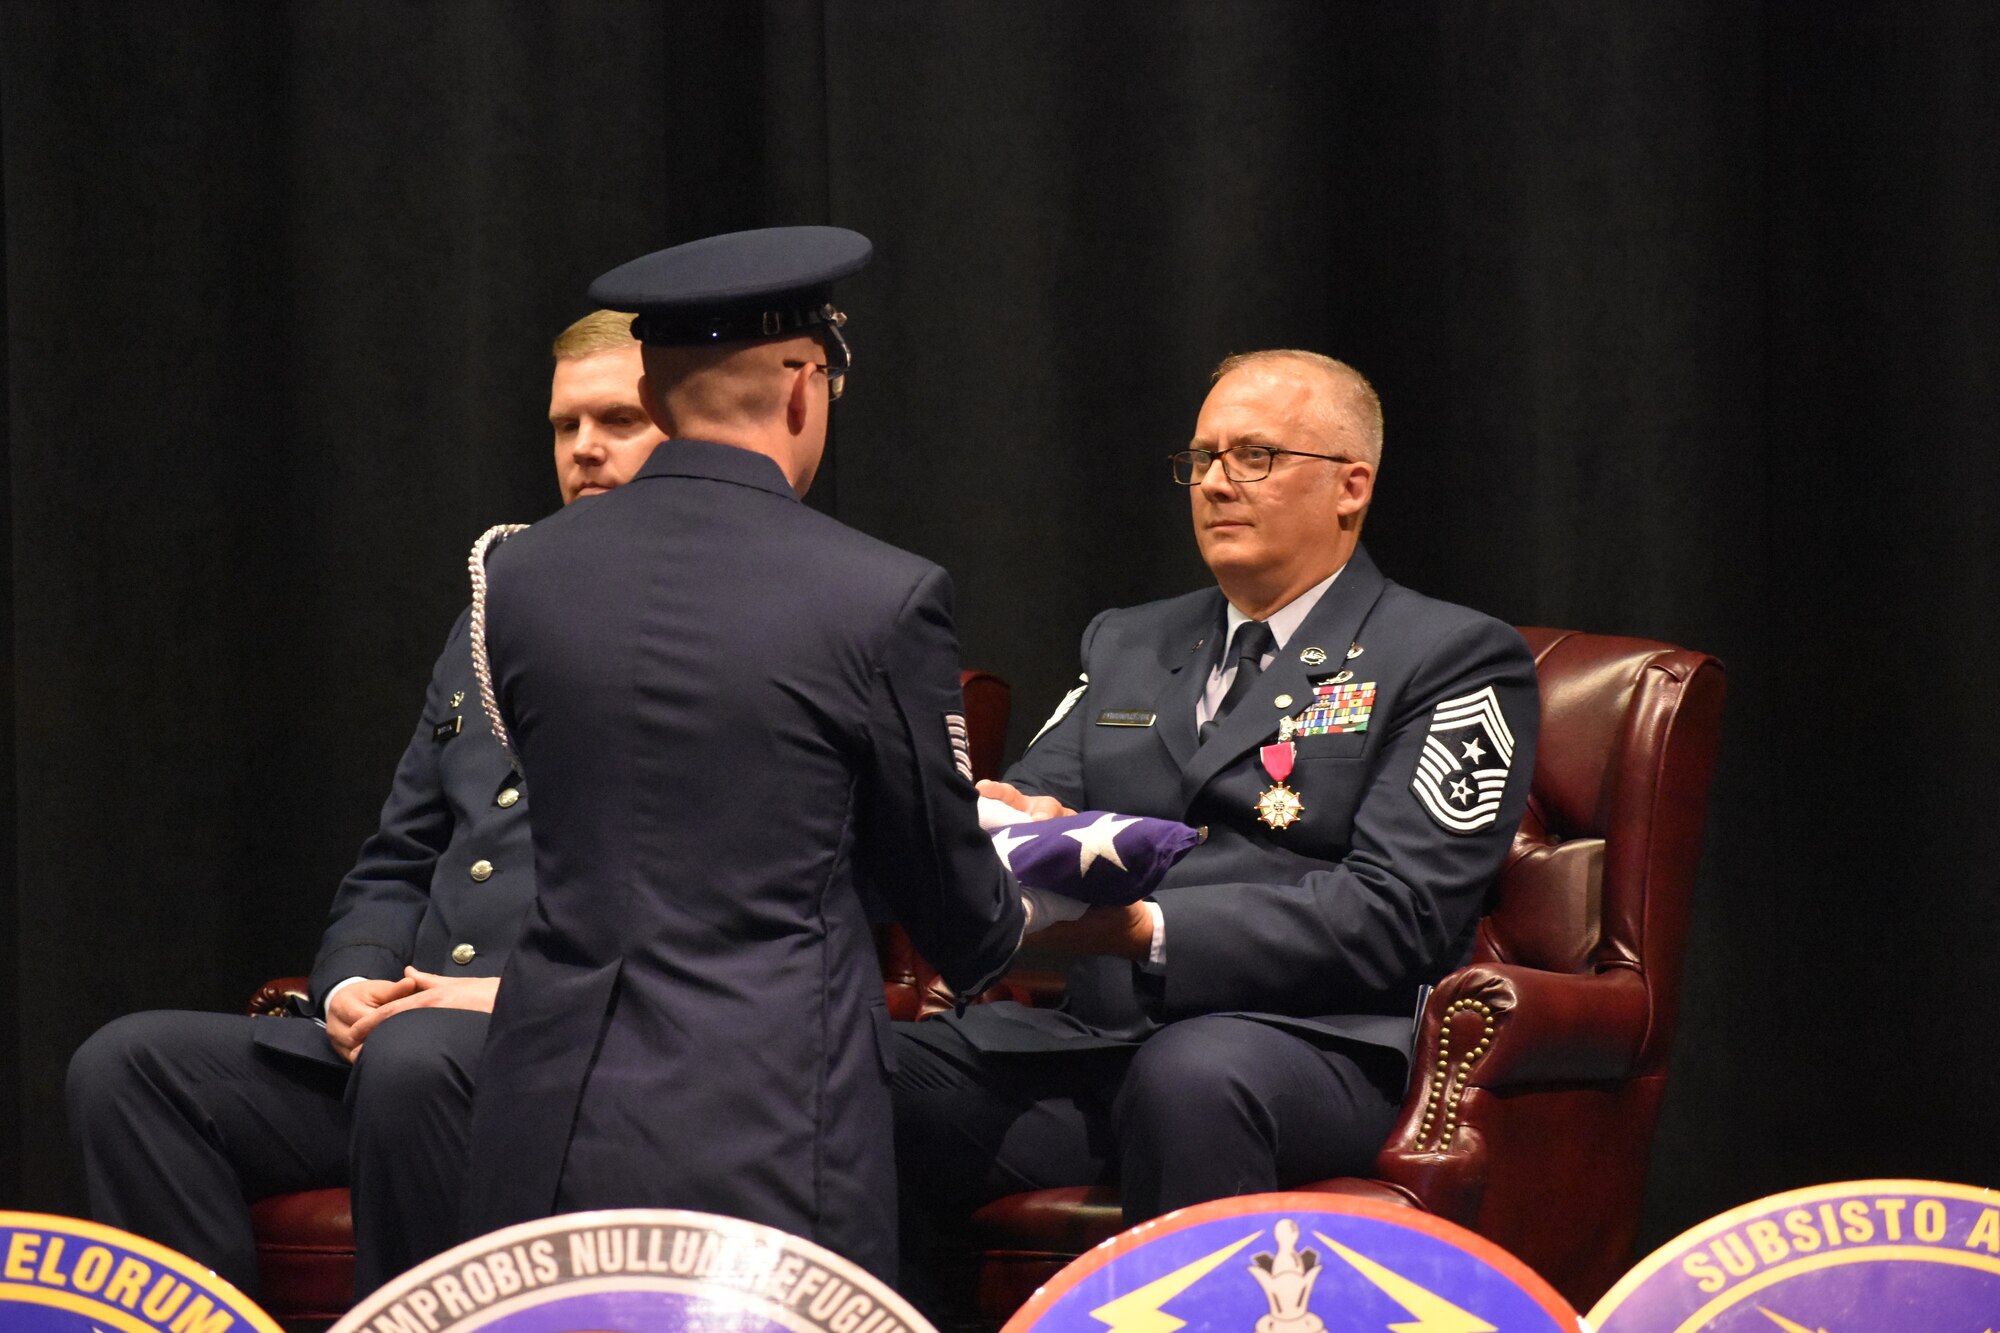 Chief Master Sgt. Bohdan Pywowarczuk II, 655th Intelligence, Surveillance and Reconnaissance Wing (ISRW) Command Chief, right, is presented with an American flag during the chief’s retirement ceremony Sept. 9, 2023, at the National Museum of the U.S. Air Force, Dayton, Ohio. (U.S. Air Force photo/Maj. Wilson Wise)